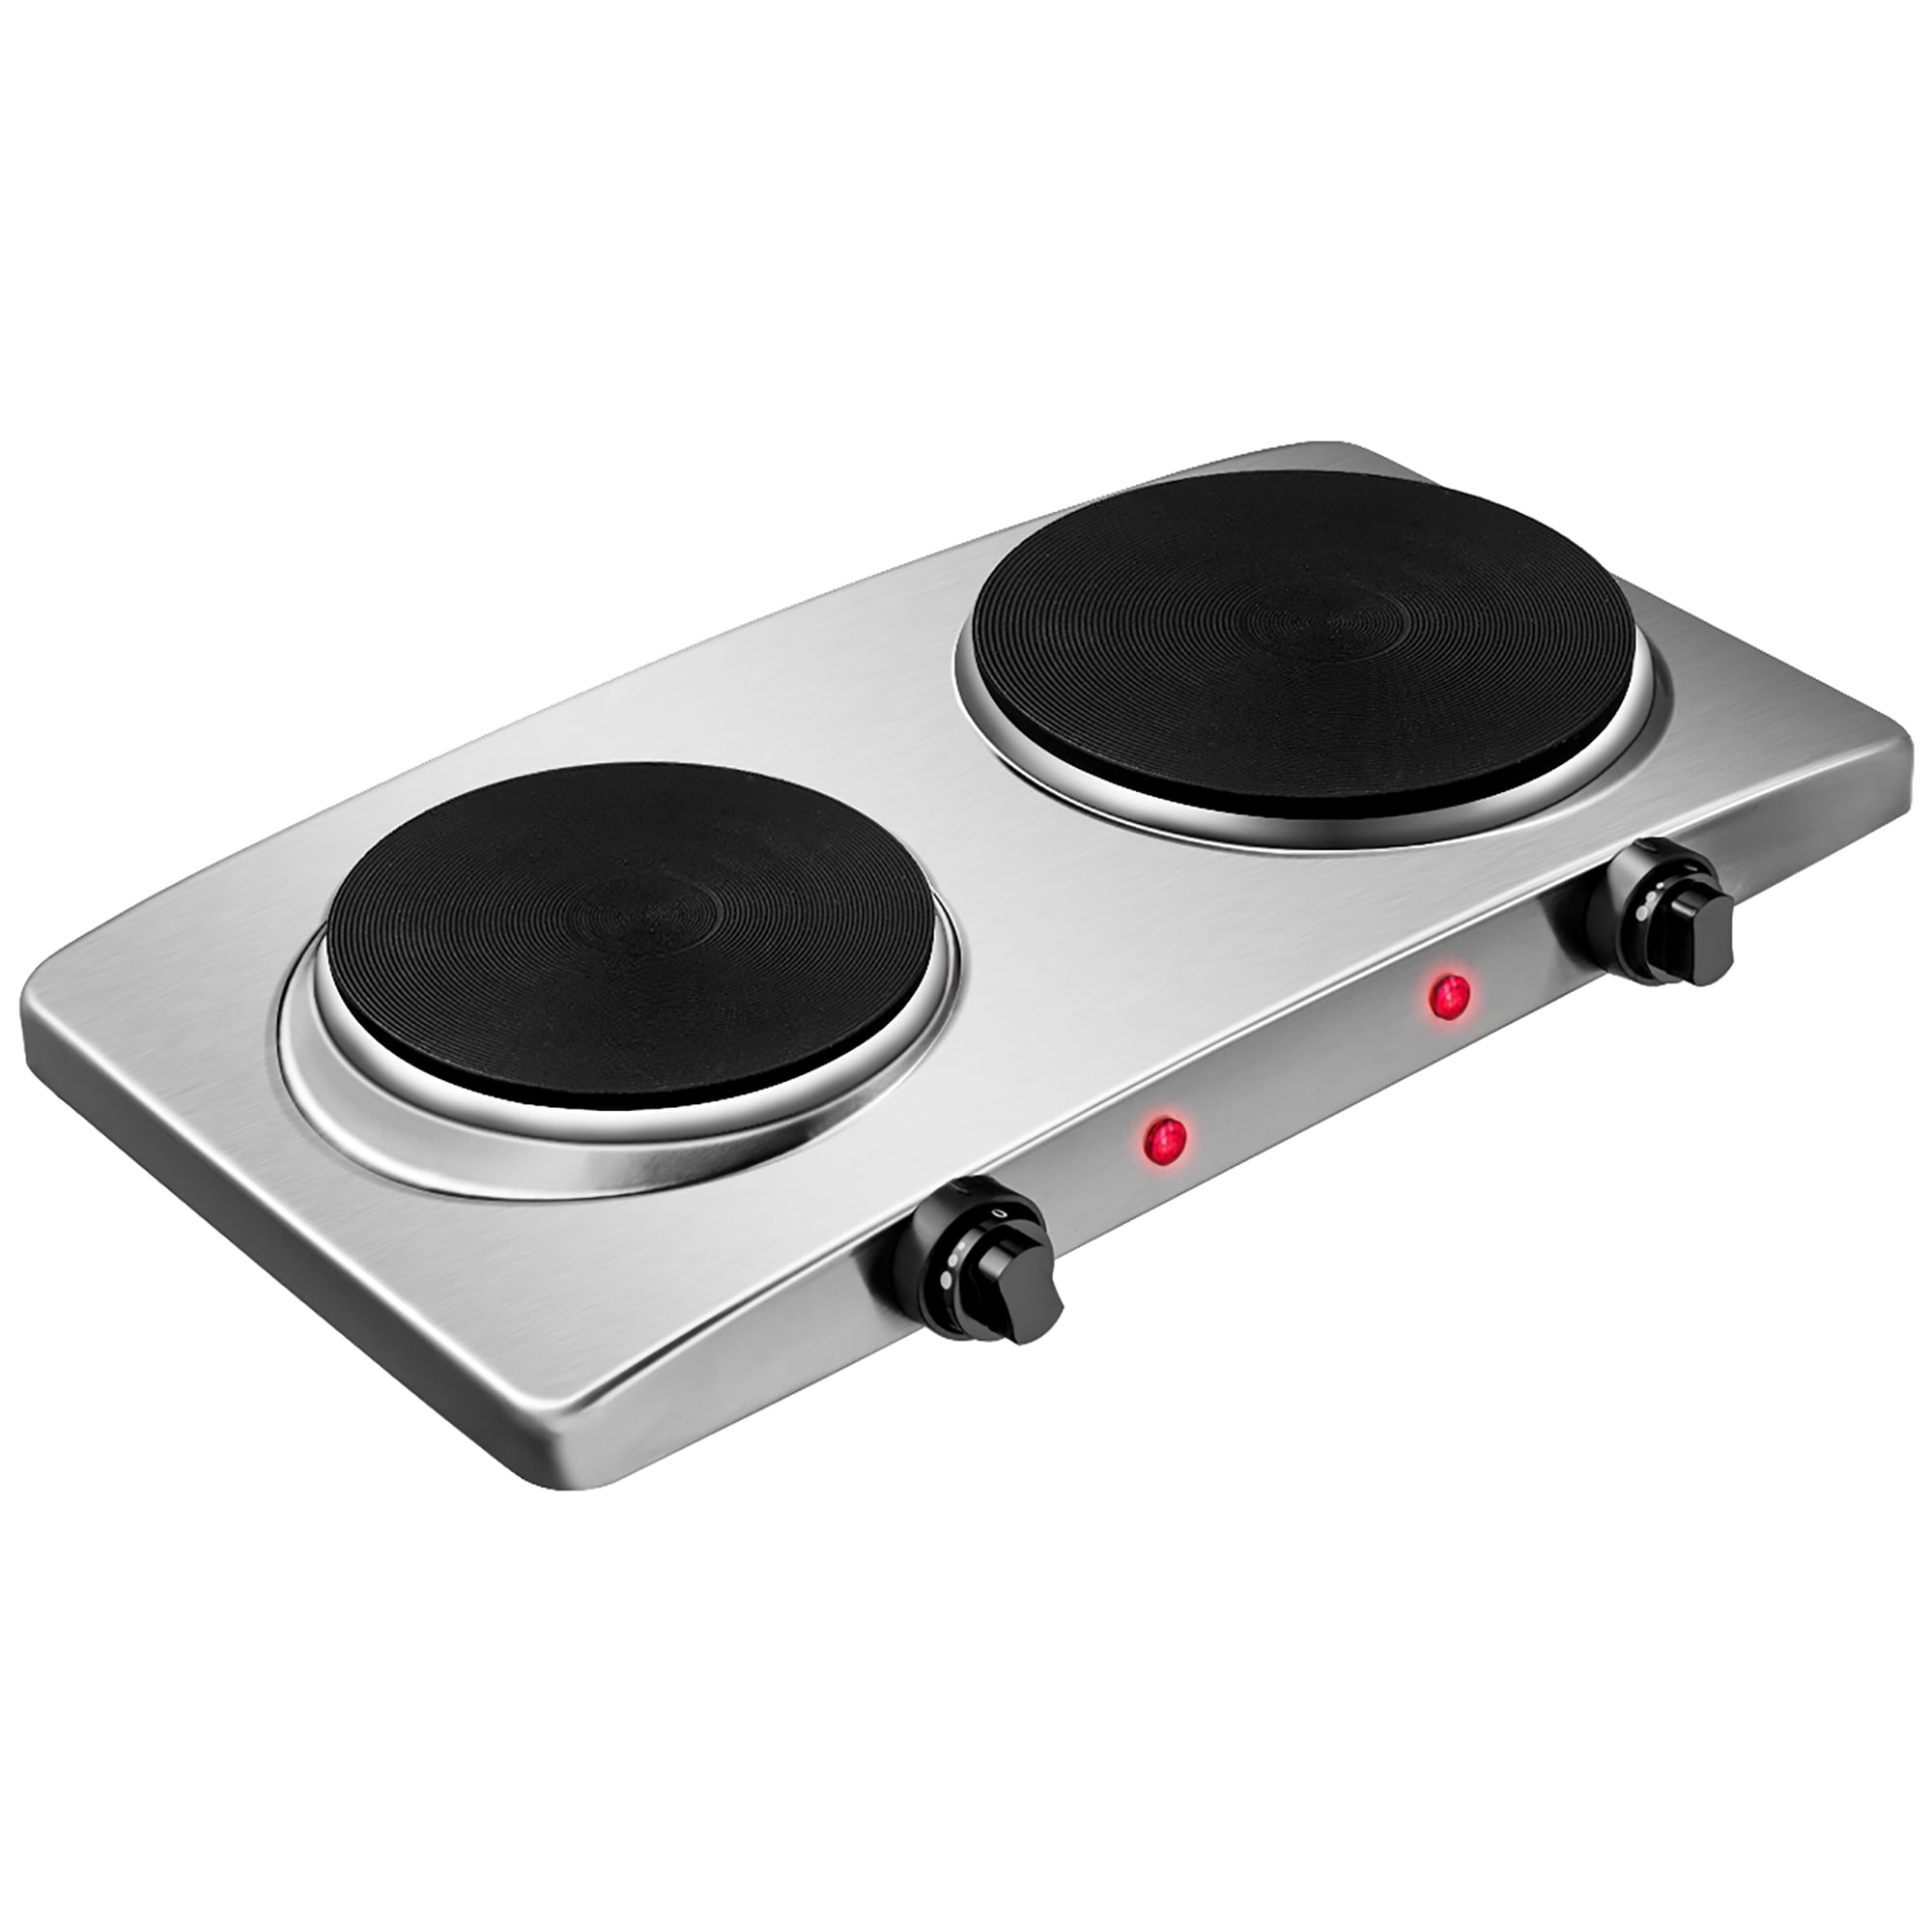 Elexnux 1800W Portable Hot Plate Electric Stove Countertop Double Burners  With Adjustable Temperature Control - On Sale - Bed Bath & Beyond - 38104723